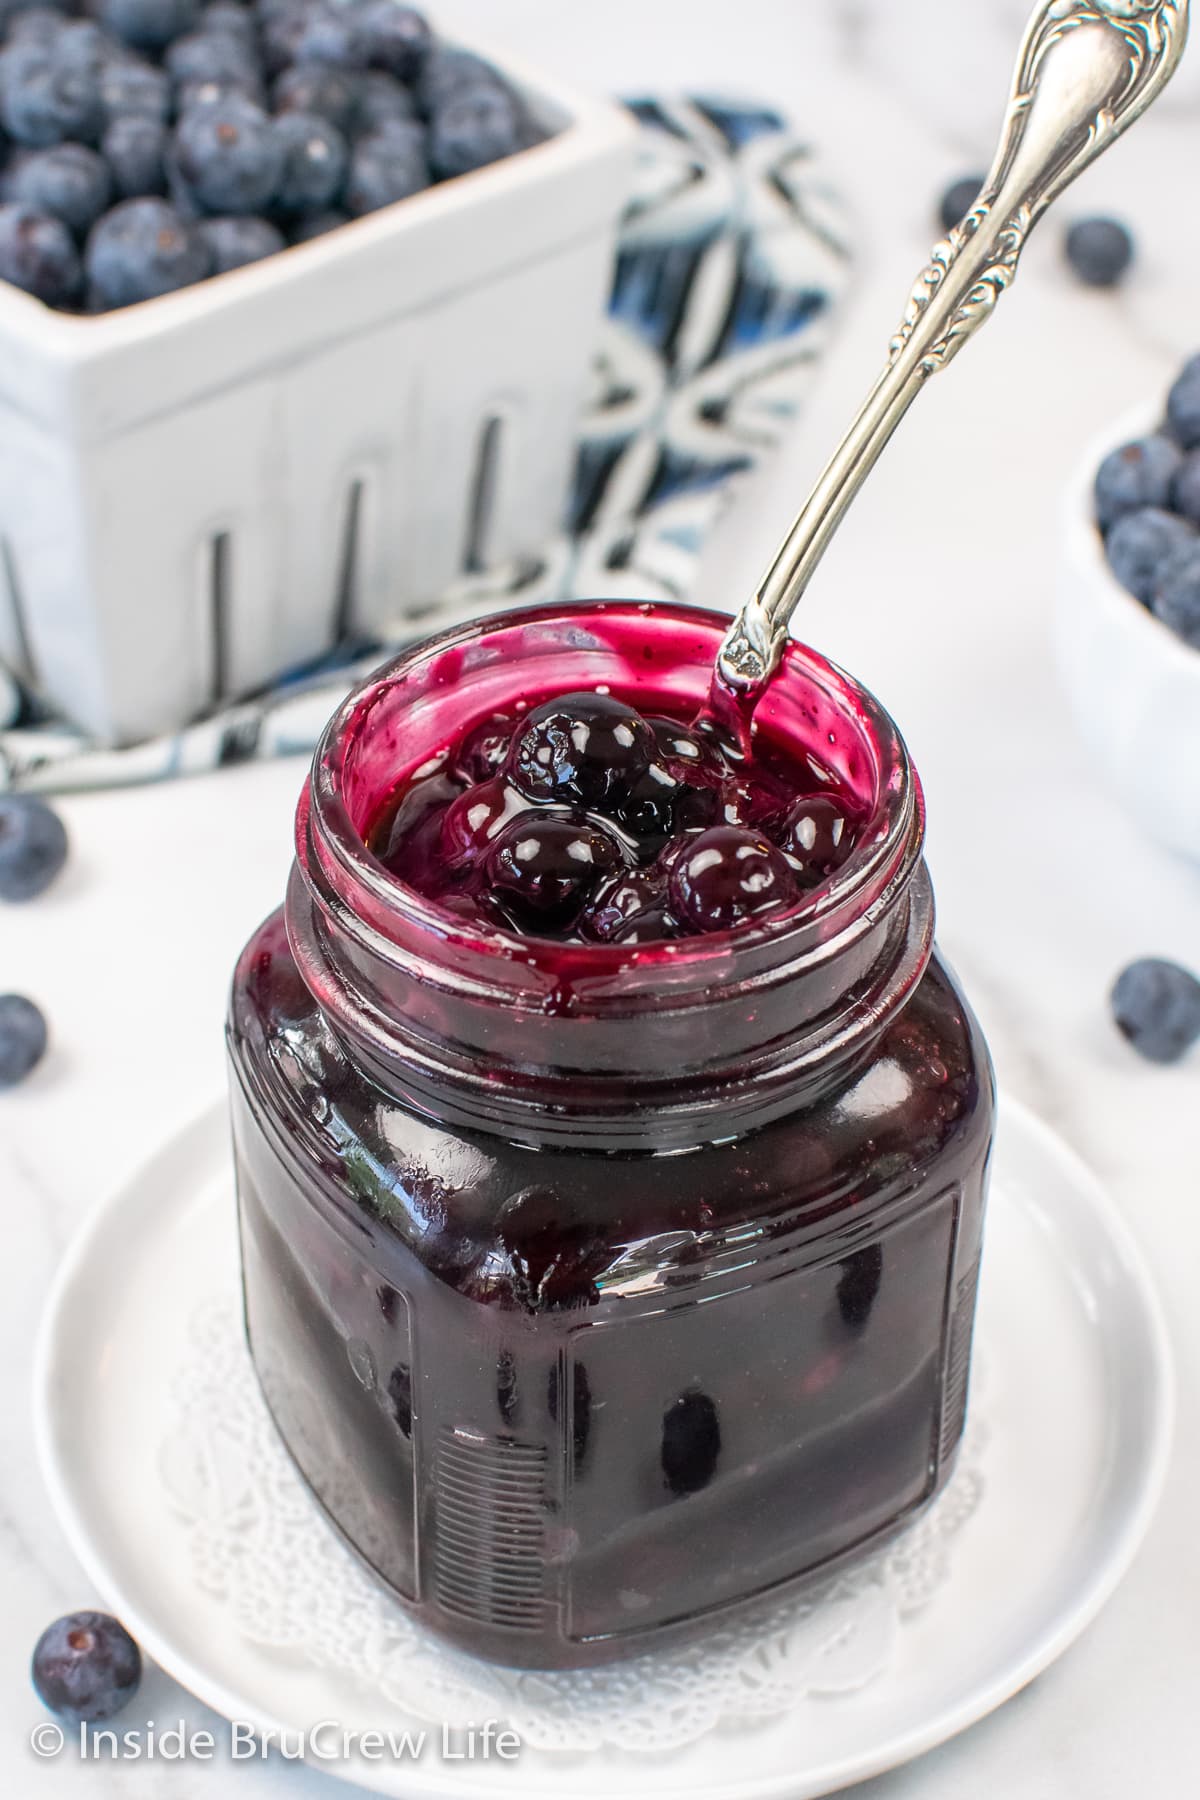 A clear jar filled with cooked blueberries and a spoon.